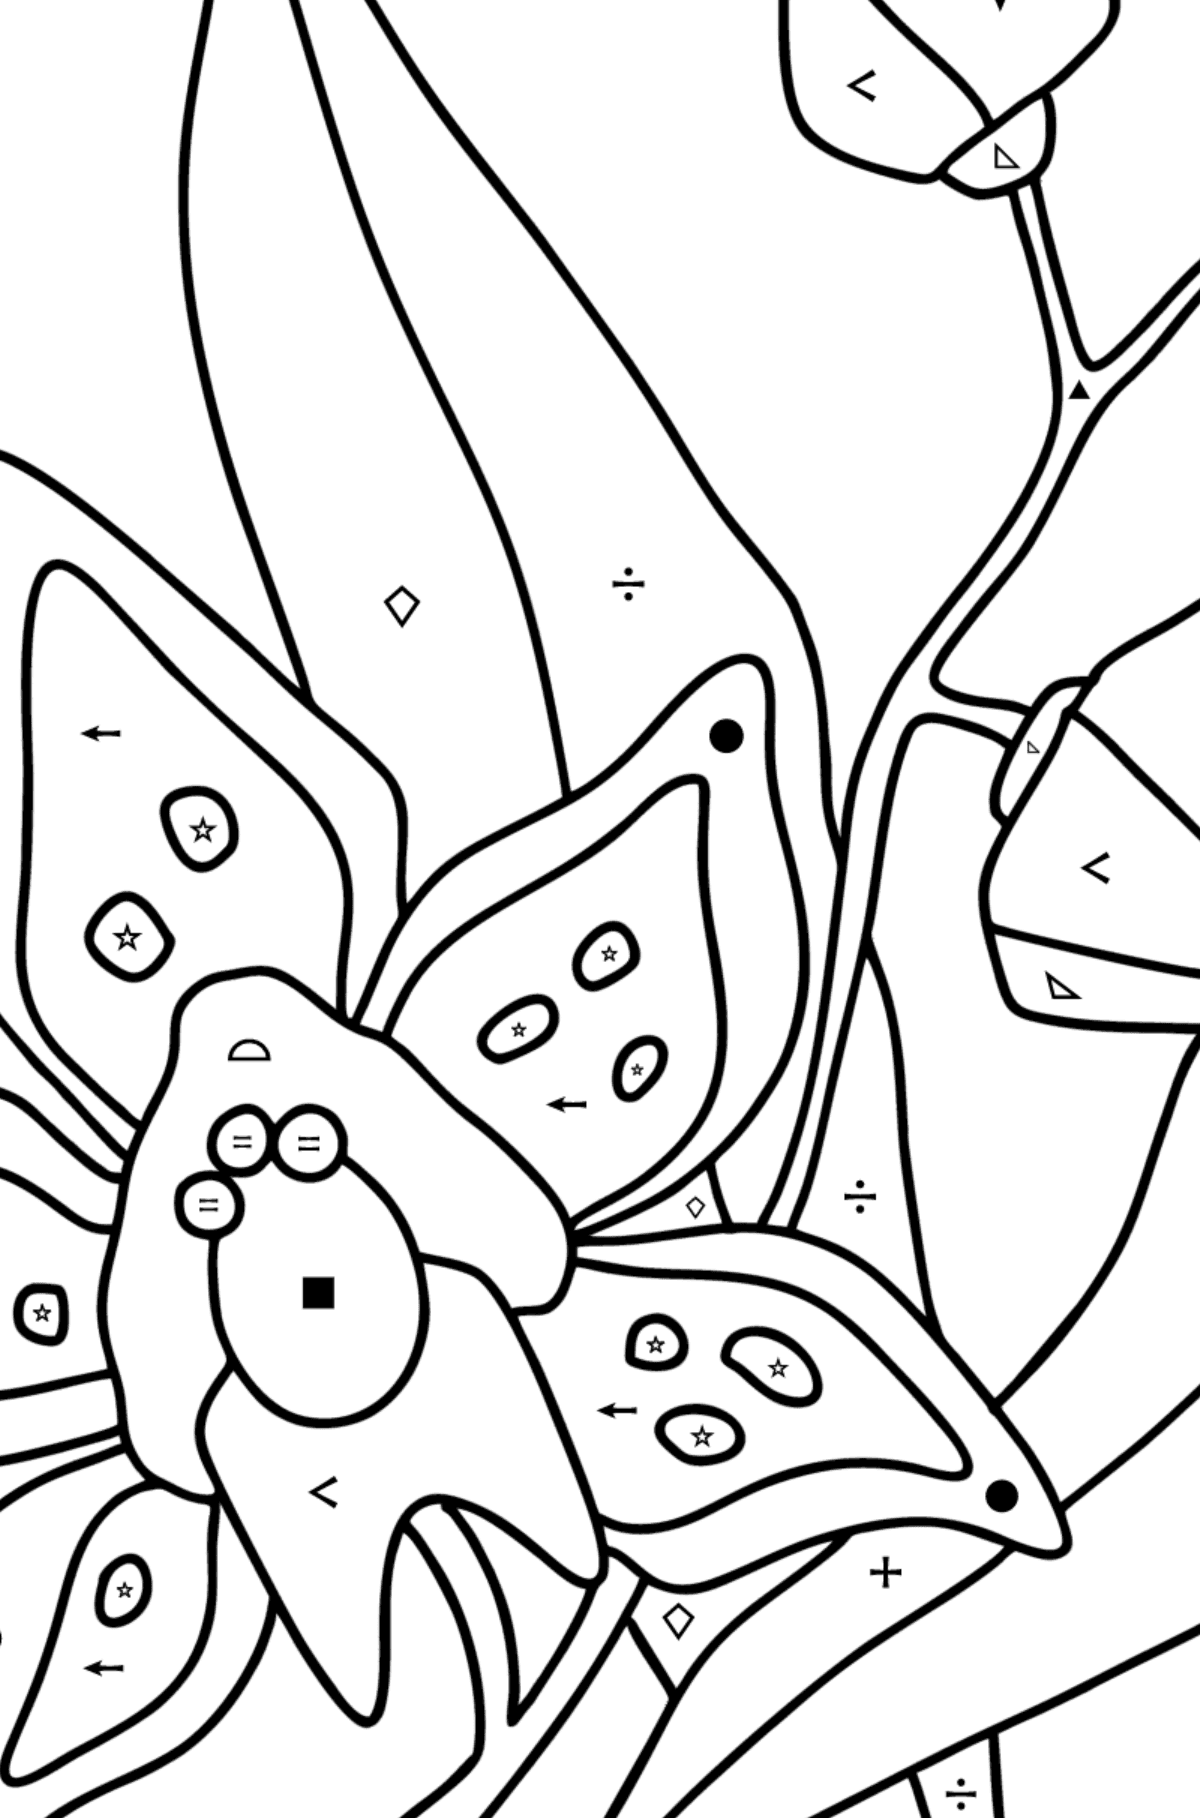 Orchid coloring page - Coloring by Symbols and Geometric Shapes for Kids